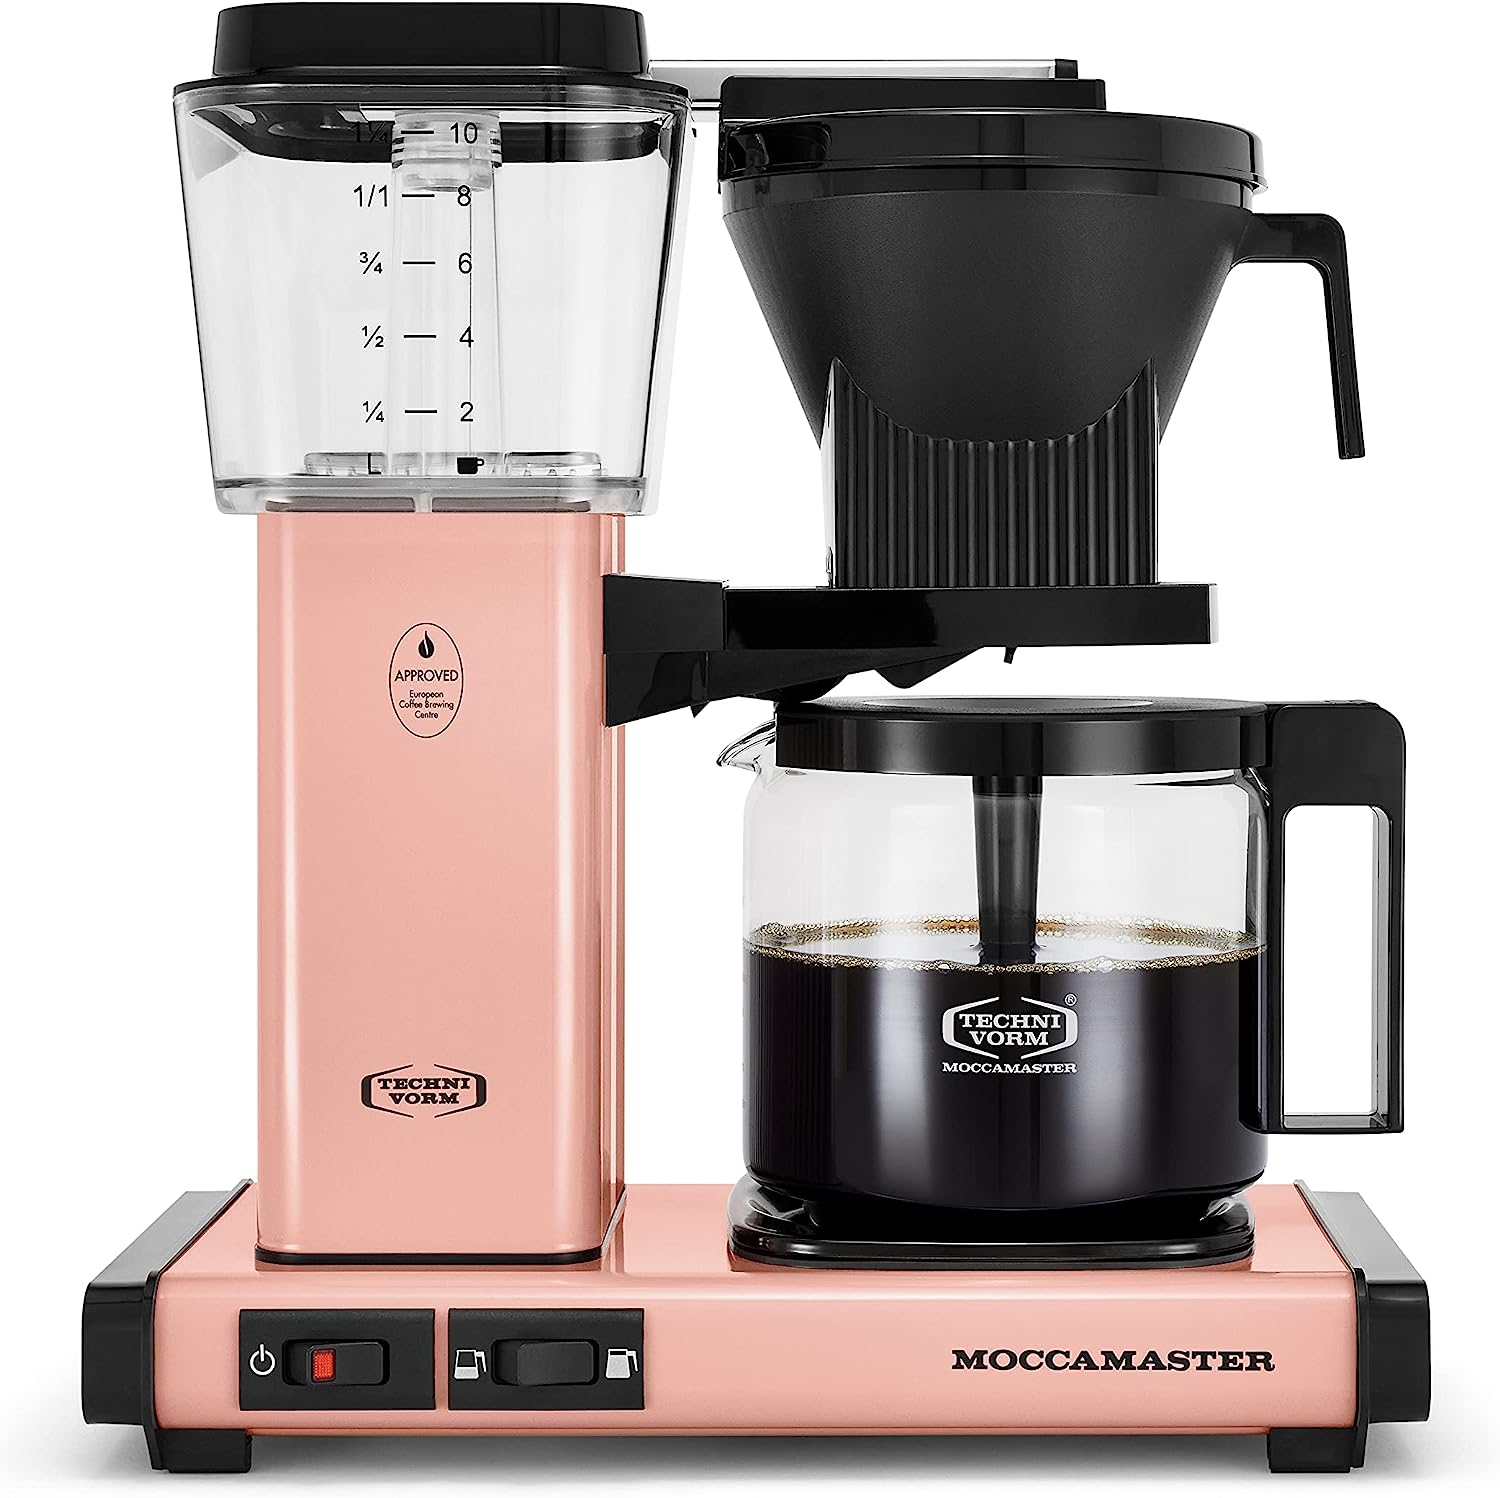 Pink coffee makers